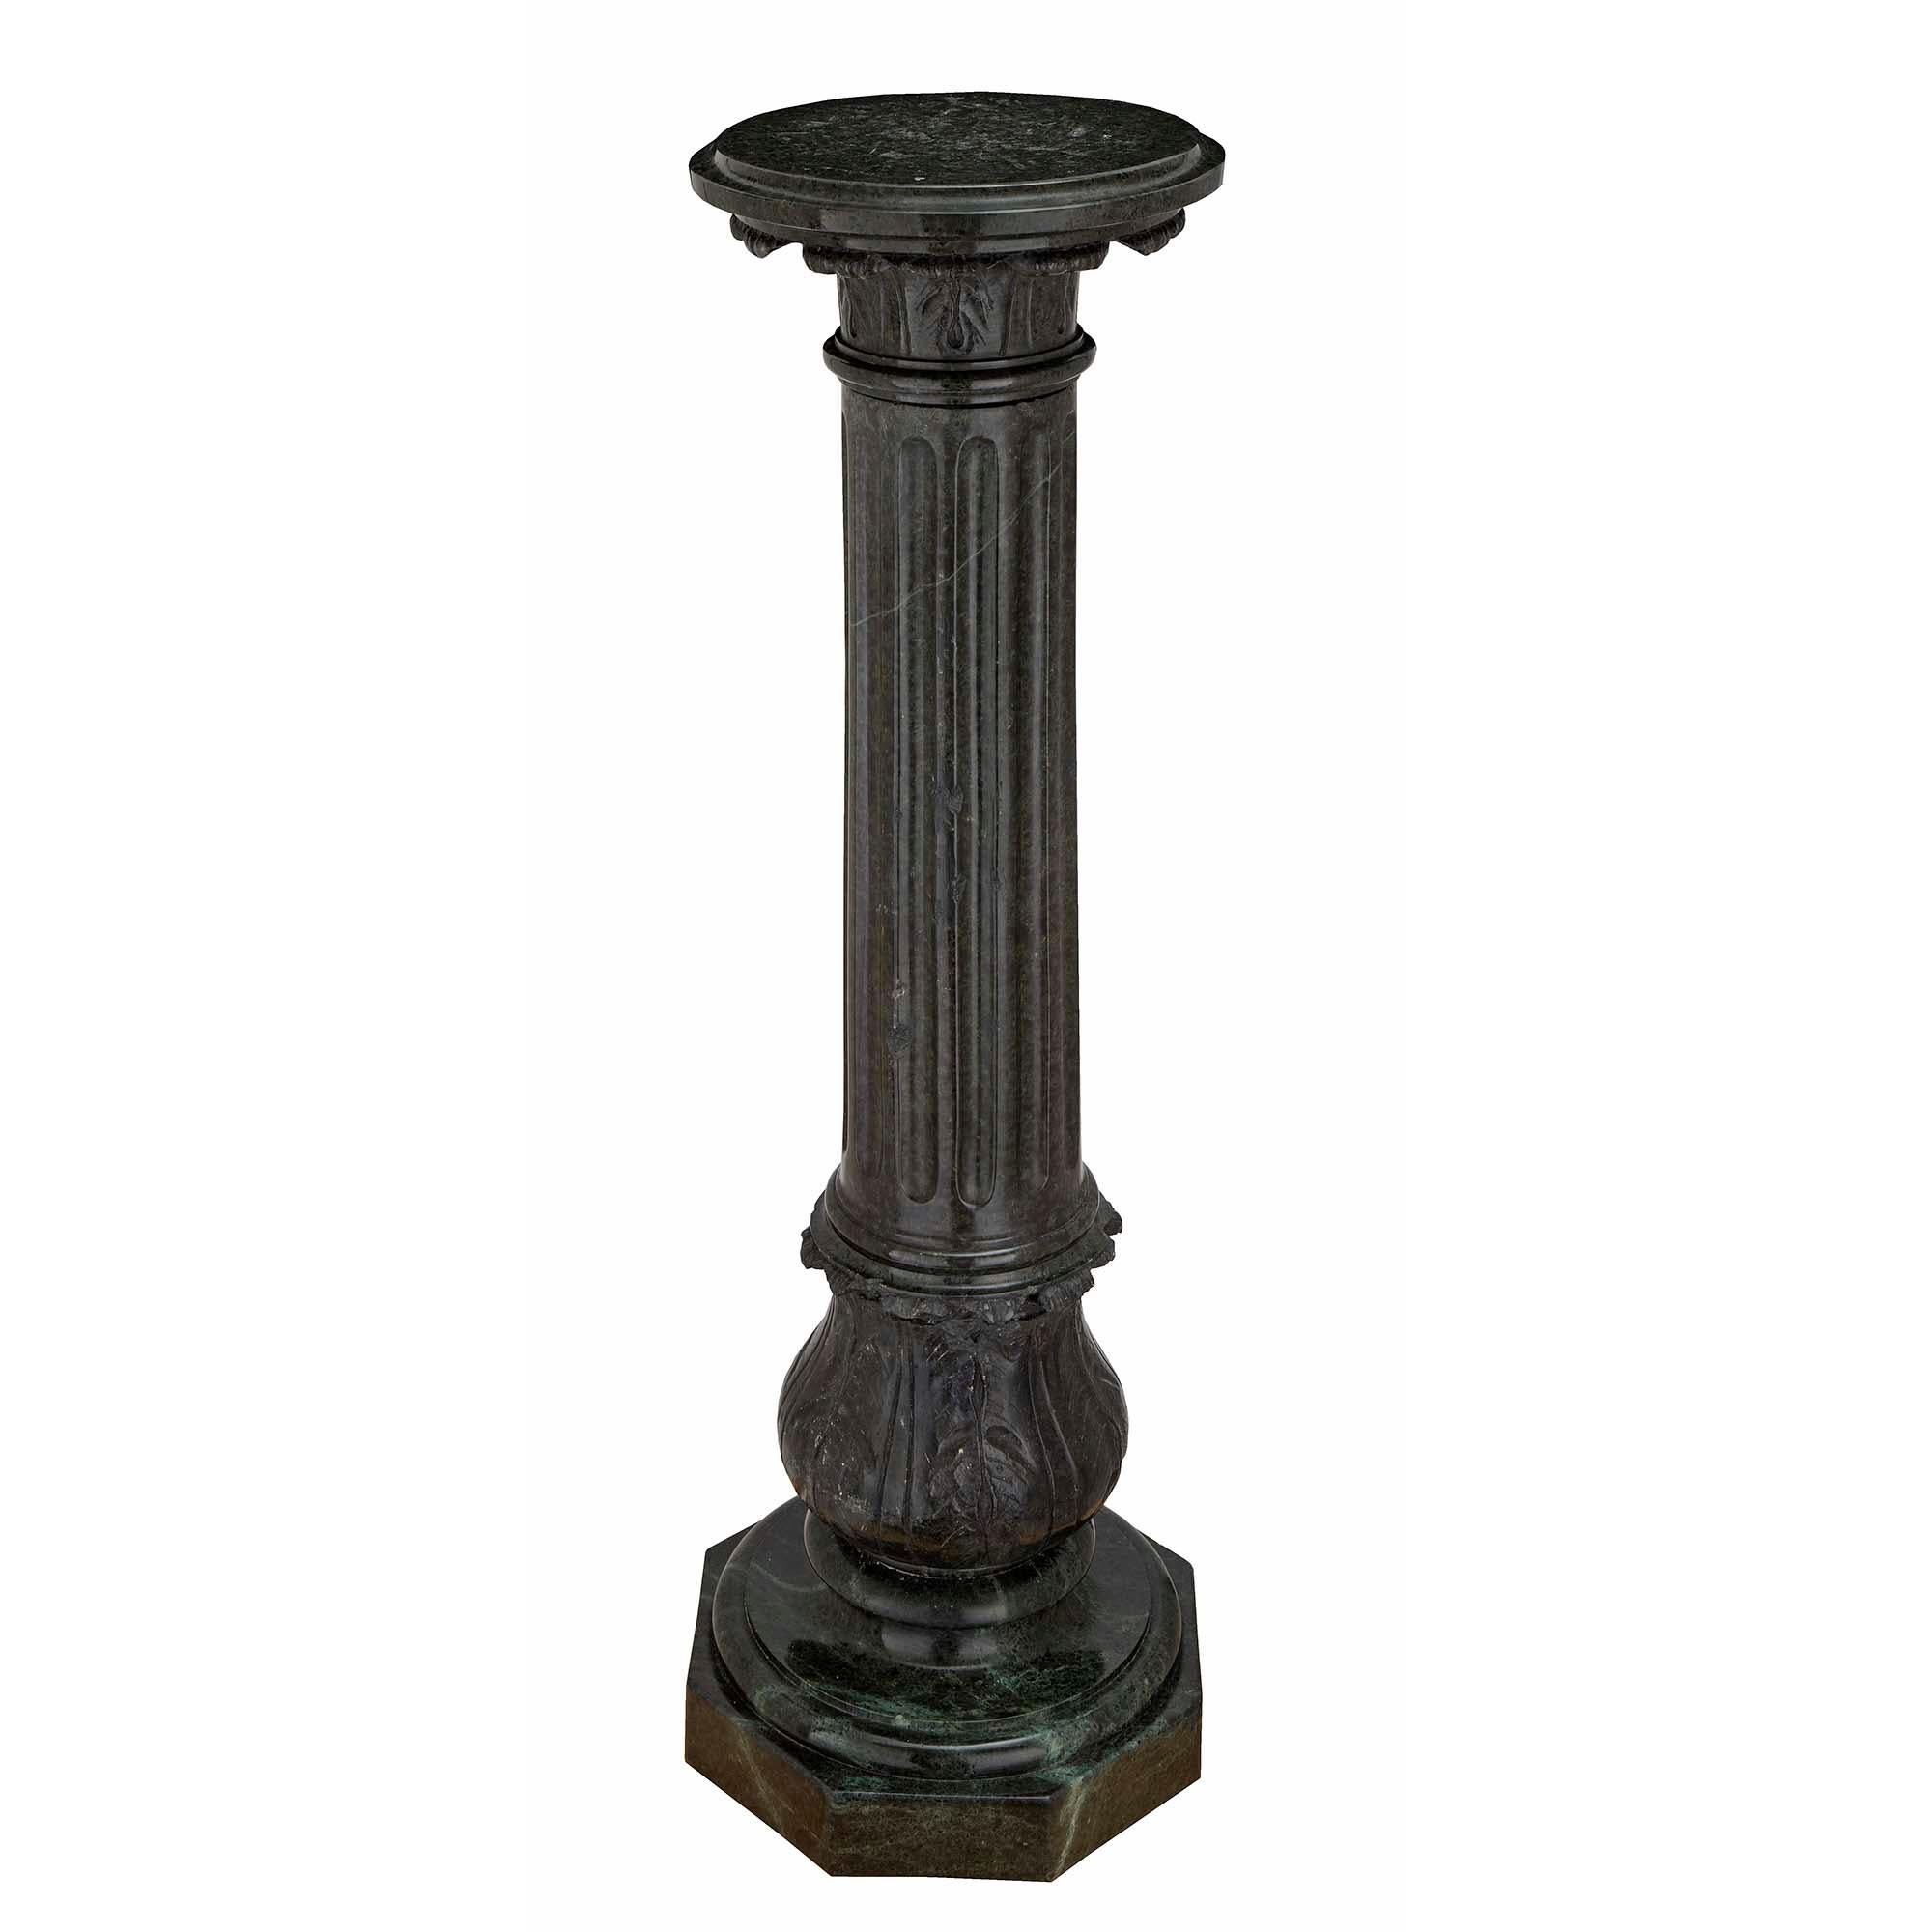 An elegant pair of Italian 19th century Louis XVI st. Verde Antico marble column pedestals. Each is raised by an octagonal base below a mottled circular design with richly carved acanthus leaves. The central column displays fluted patterns and